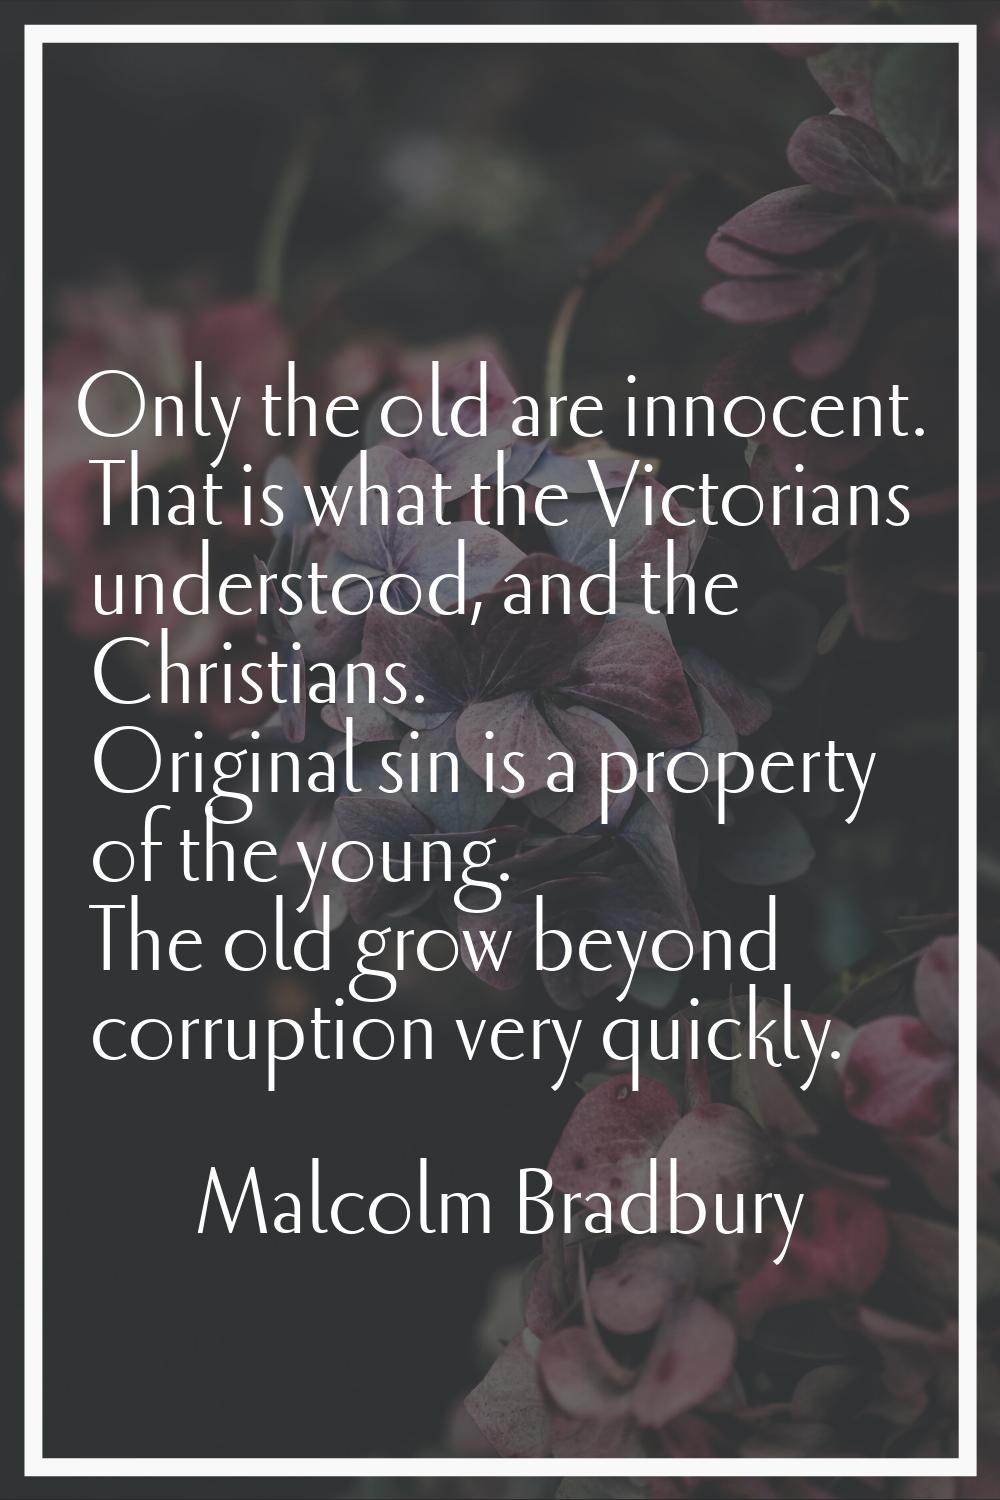 Only the old are innocent. That is what the Victorians understood, and the Christians. Original sin